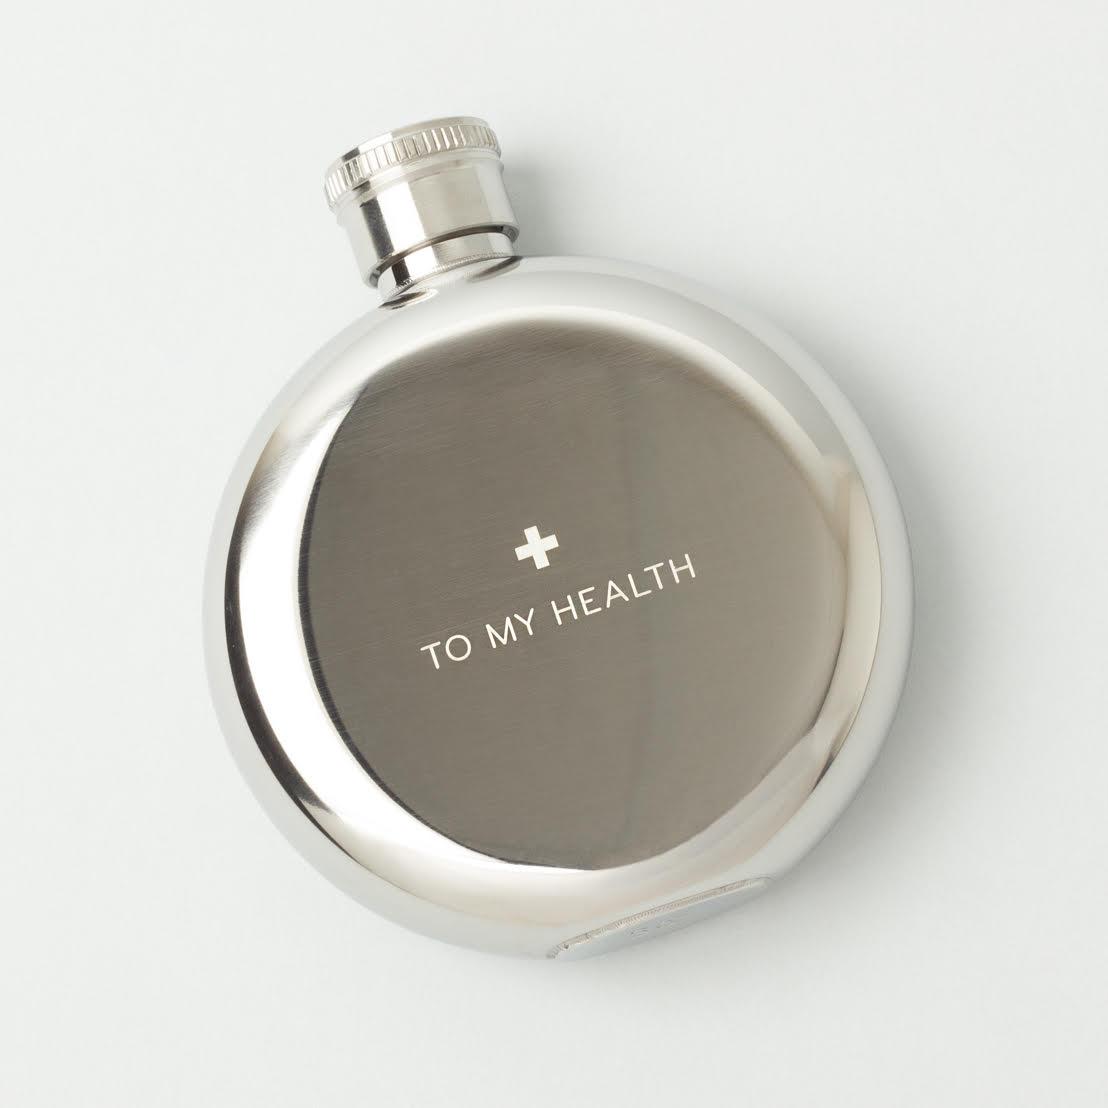 Men's Society Hip Flask Don't Drink & Ride